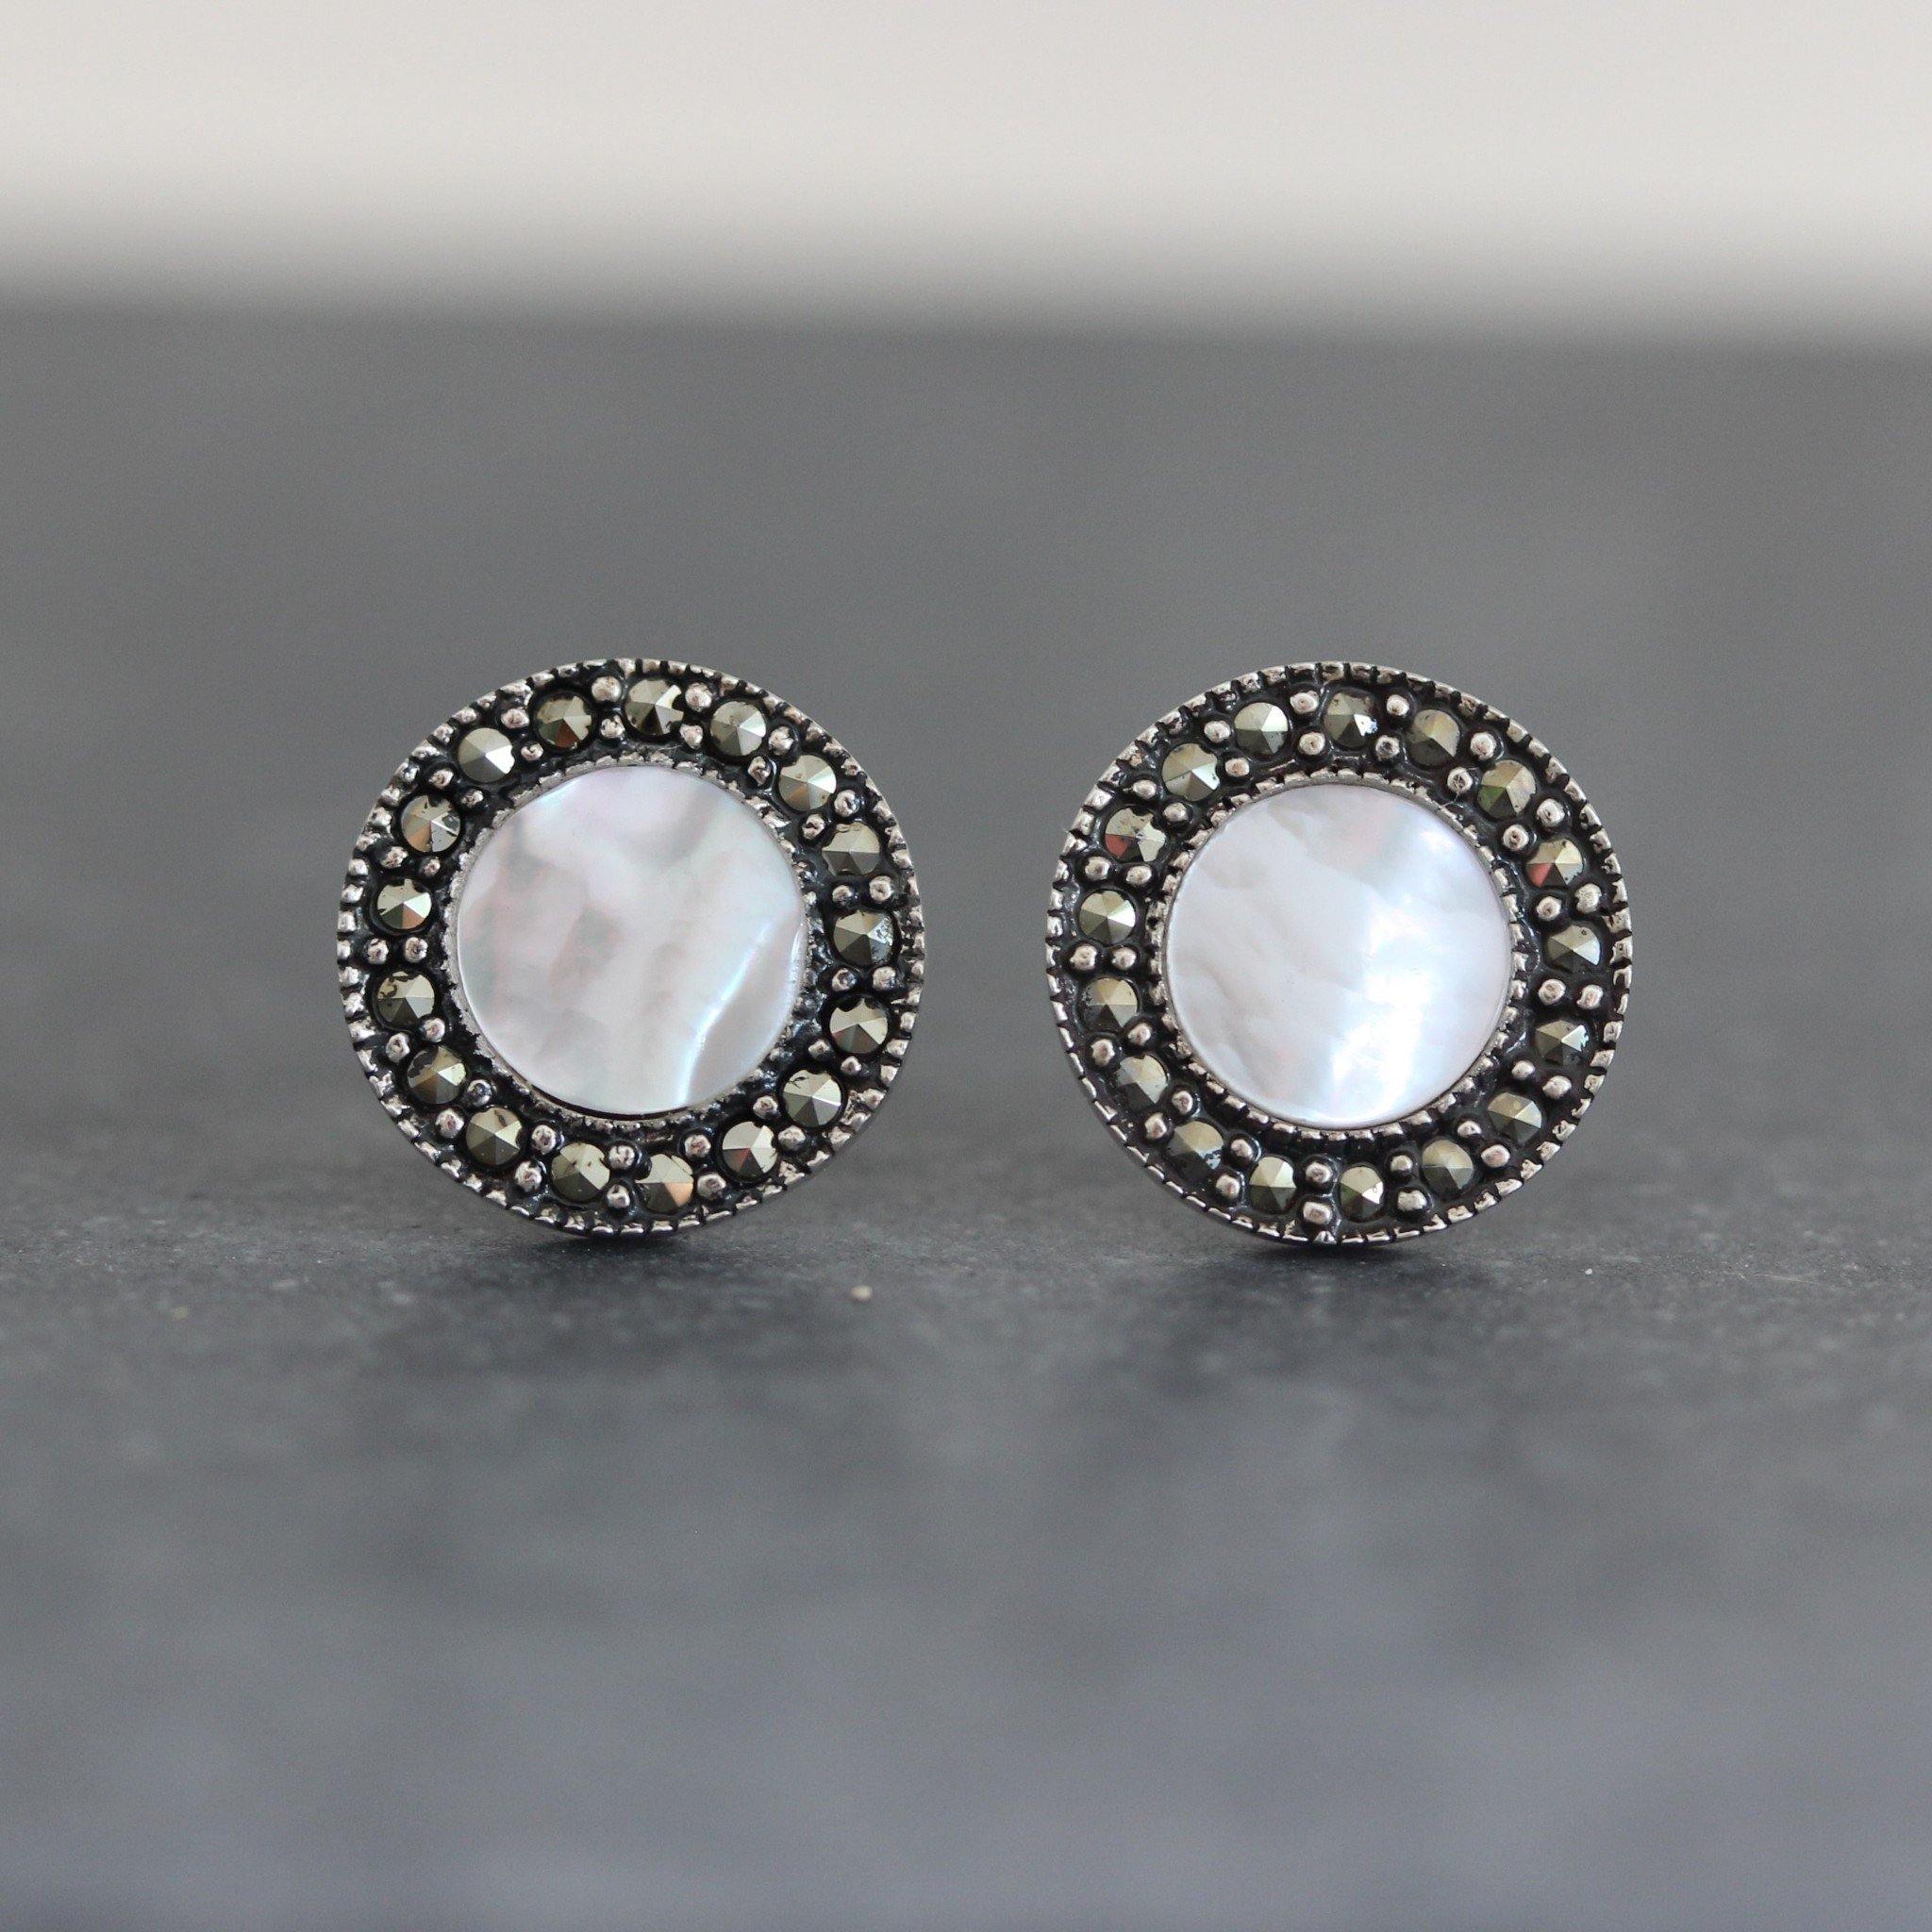 Sterling Silver 10mm Round Marcasite & Mother of Pearl Stud Earrings - STERLING SILVER DESIGNS